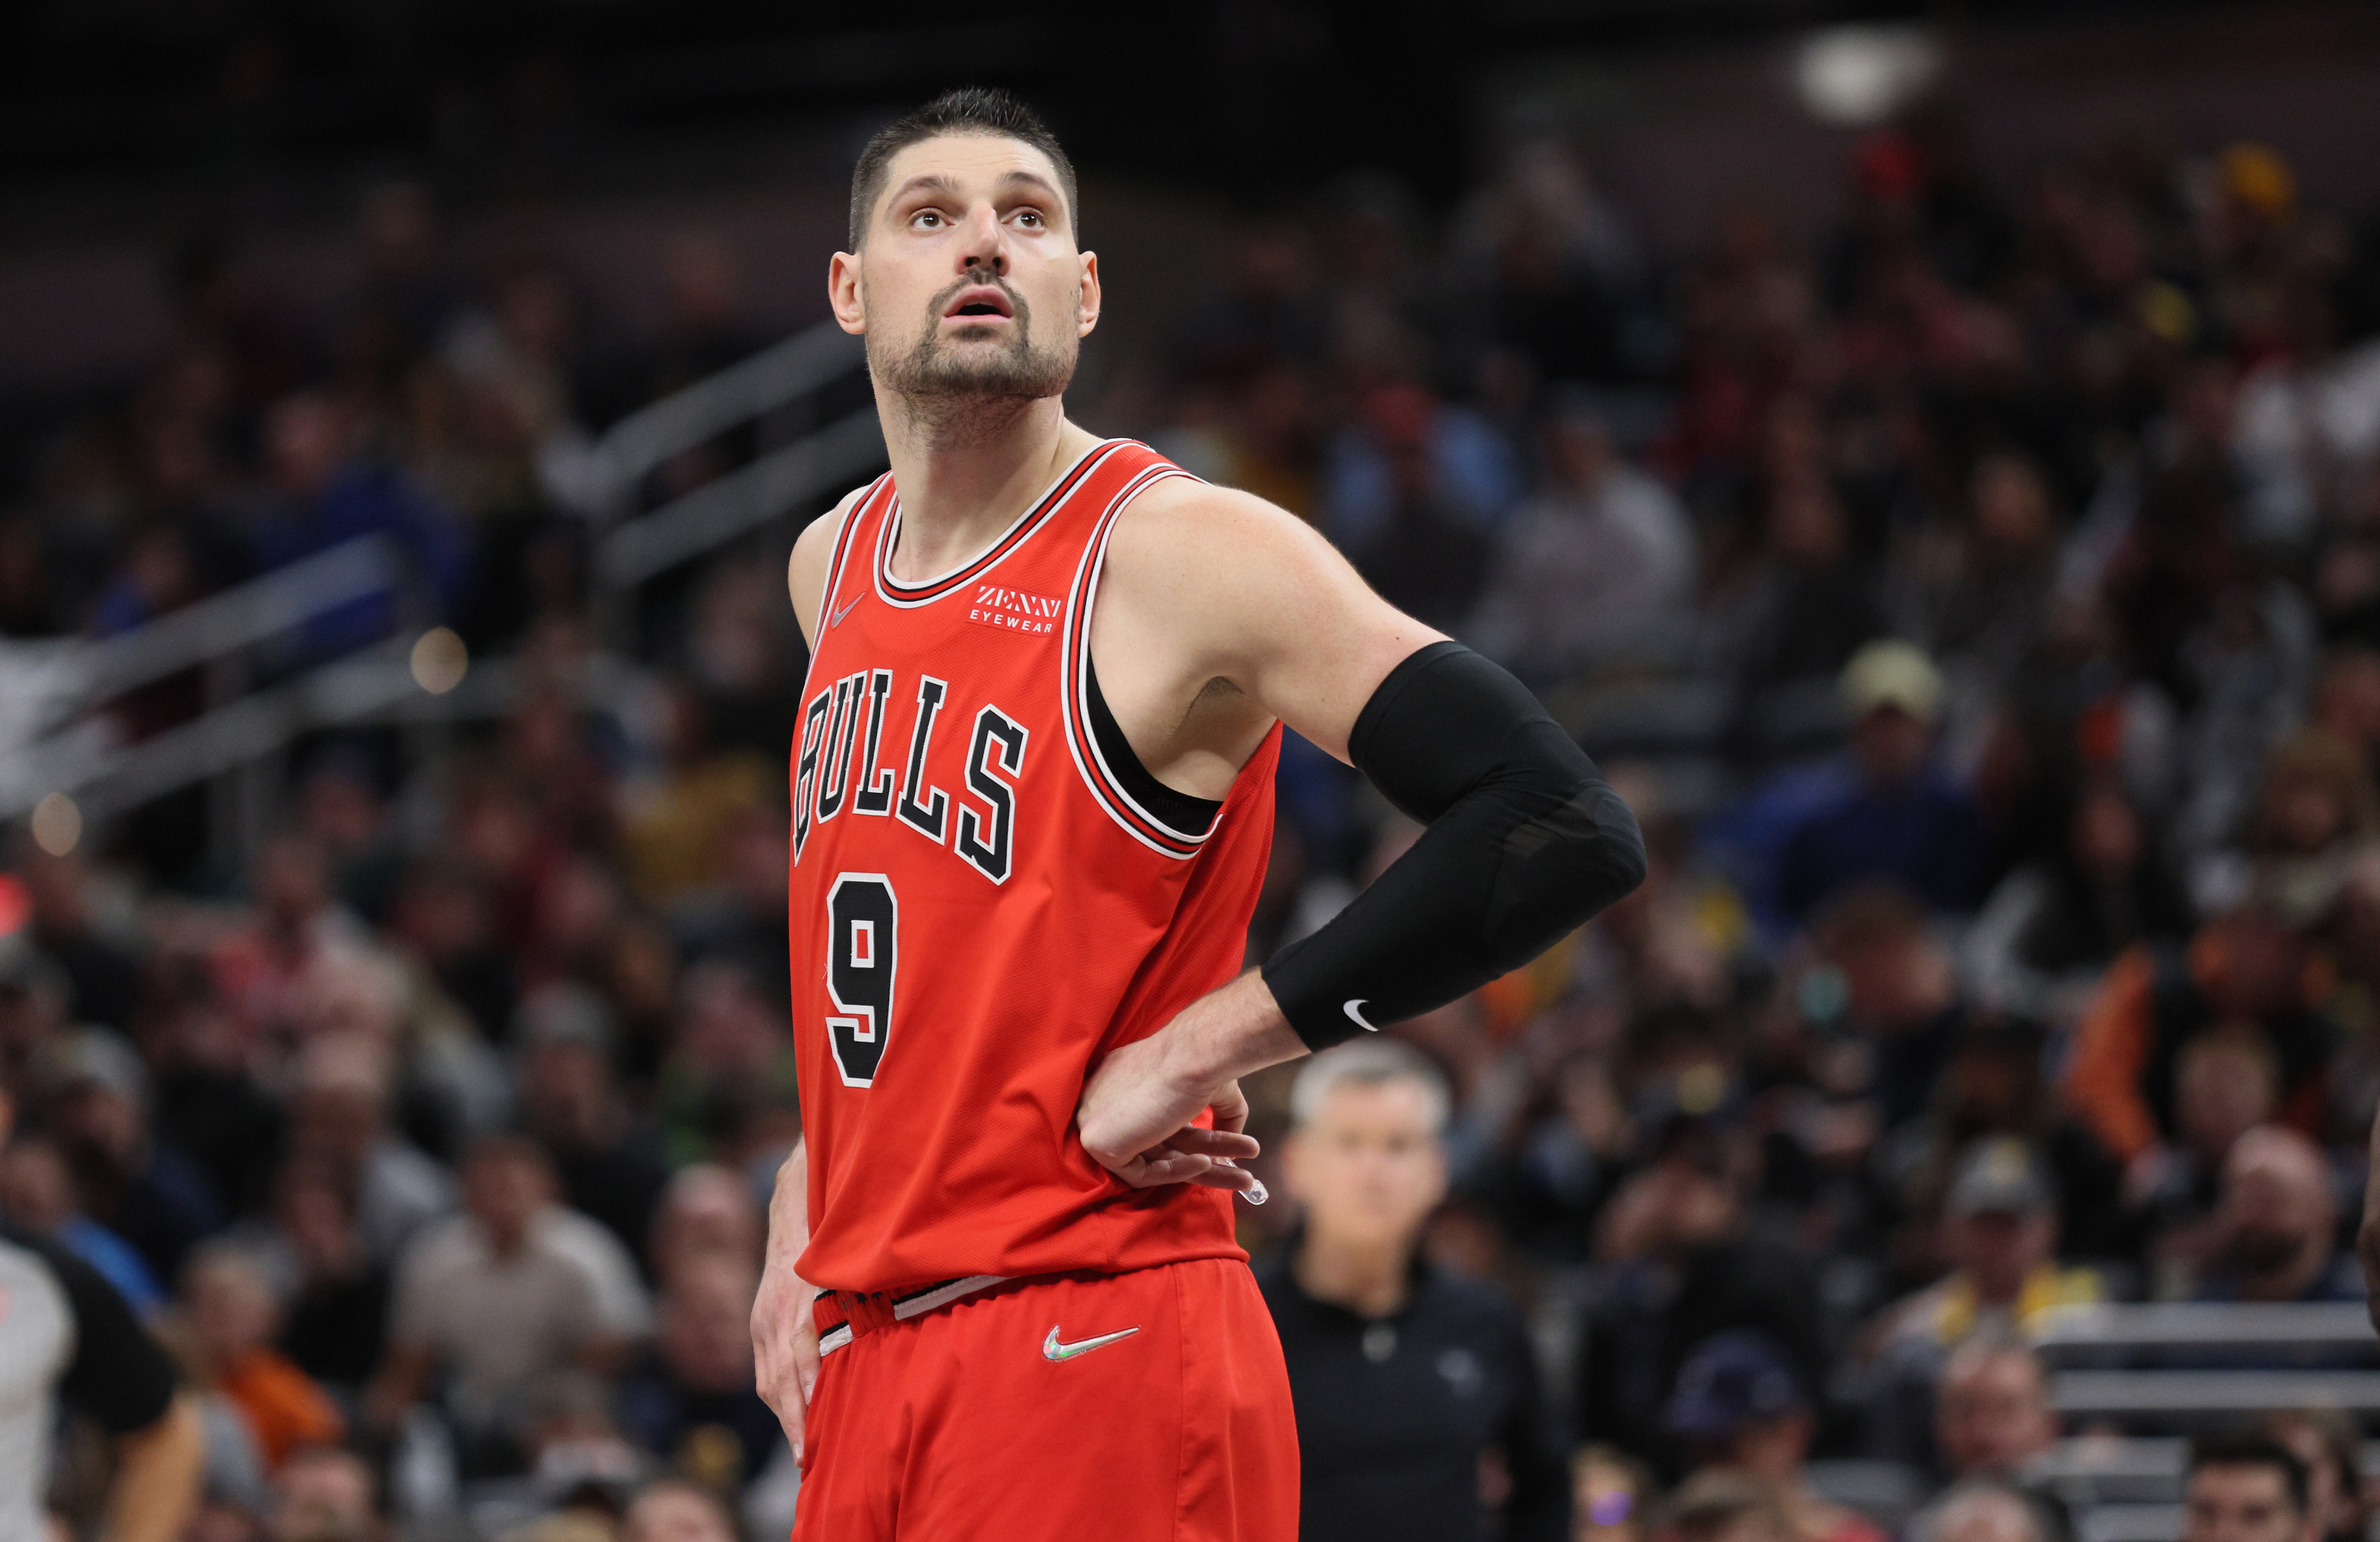 Chicago Bulls center Nikola Vucevic stands for his headshot during